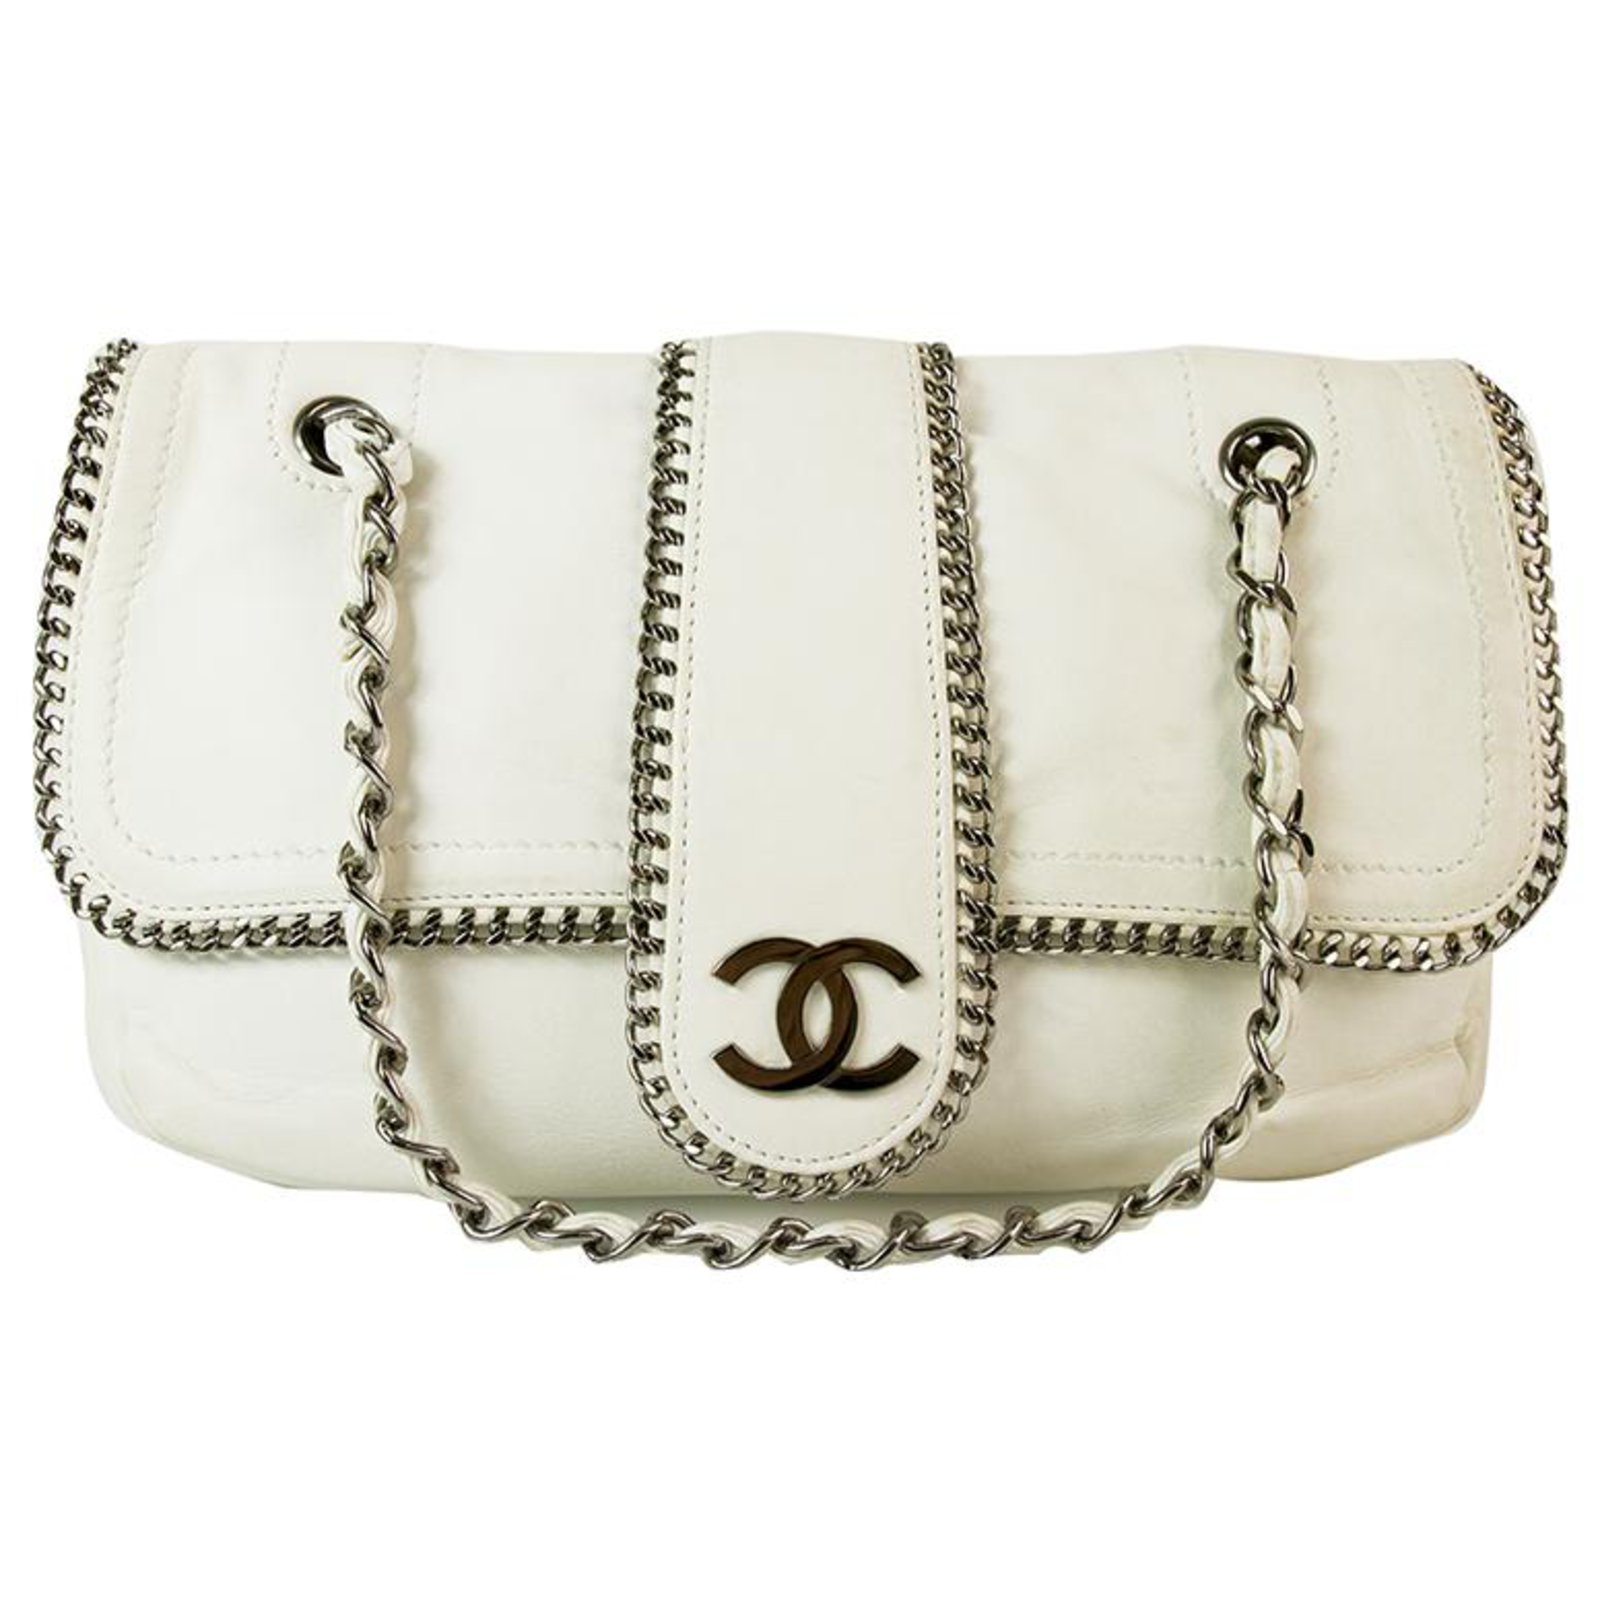 Chanel White Leather Chain Around Single Flap Bag with gunmetal